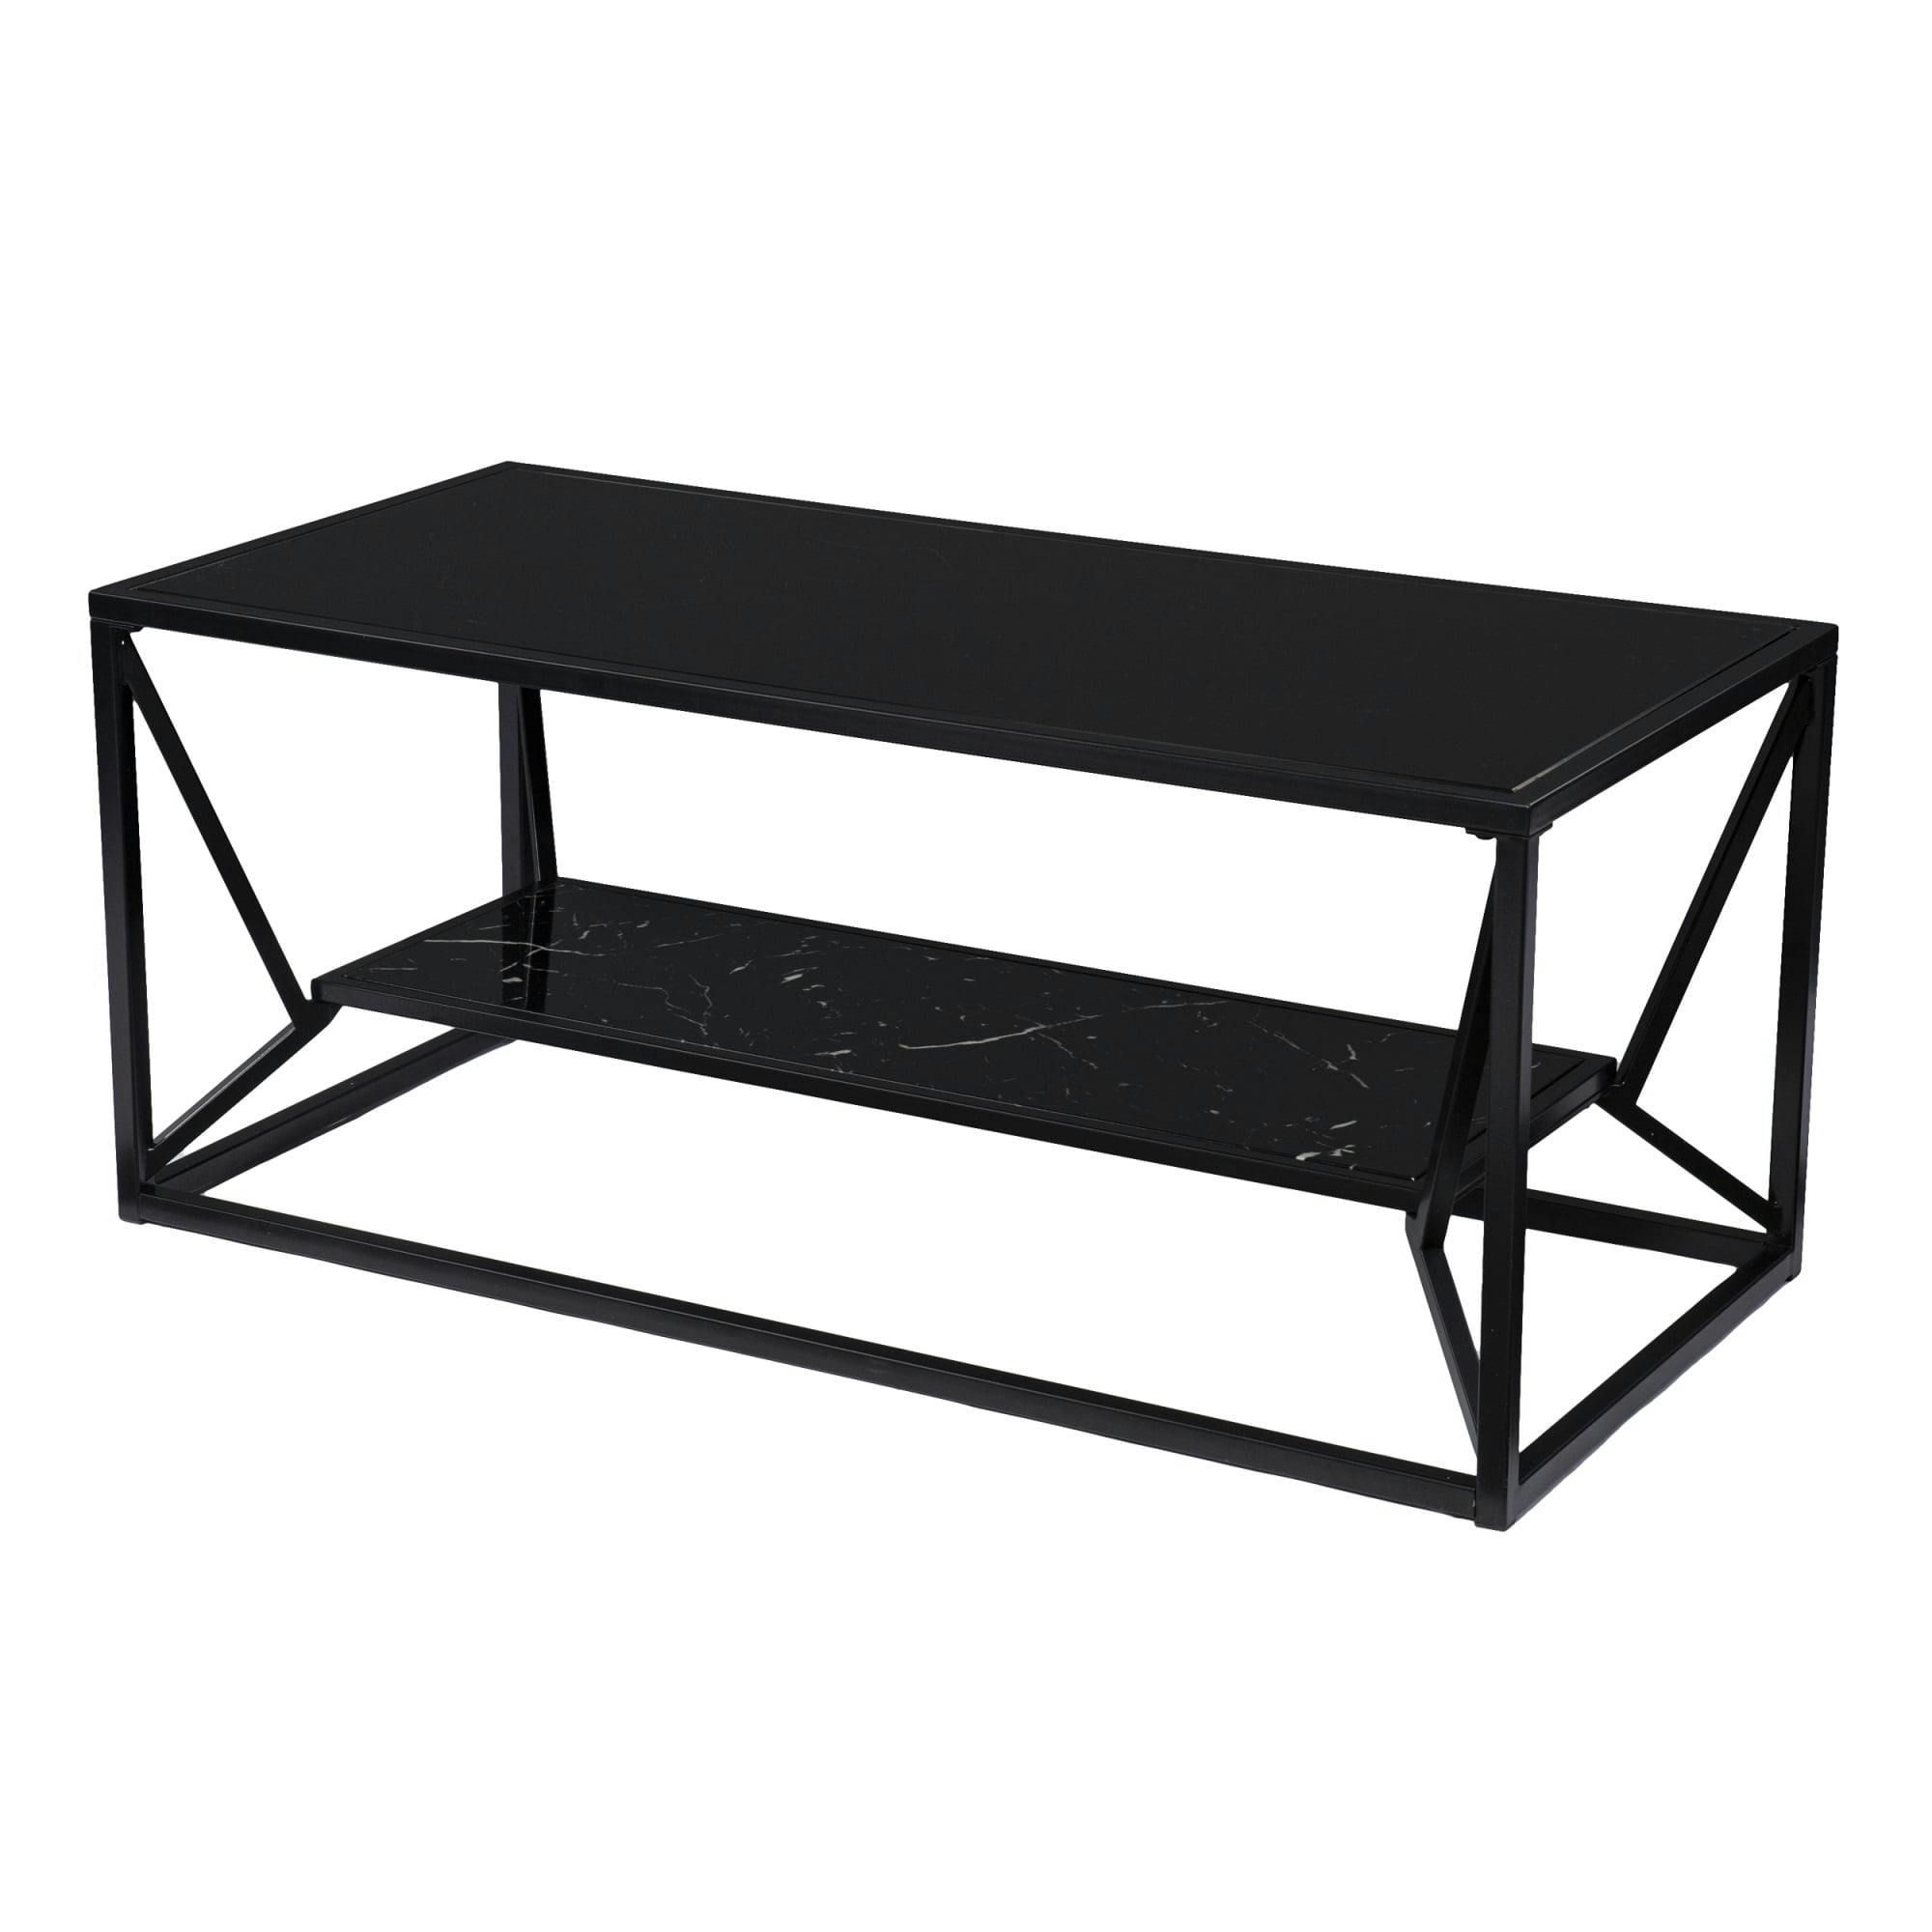 Modern Black Glass-Top Coffee Table with Faux Marble Shelf